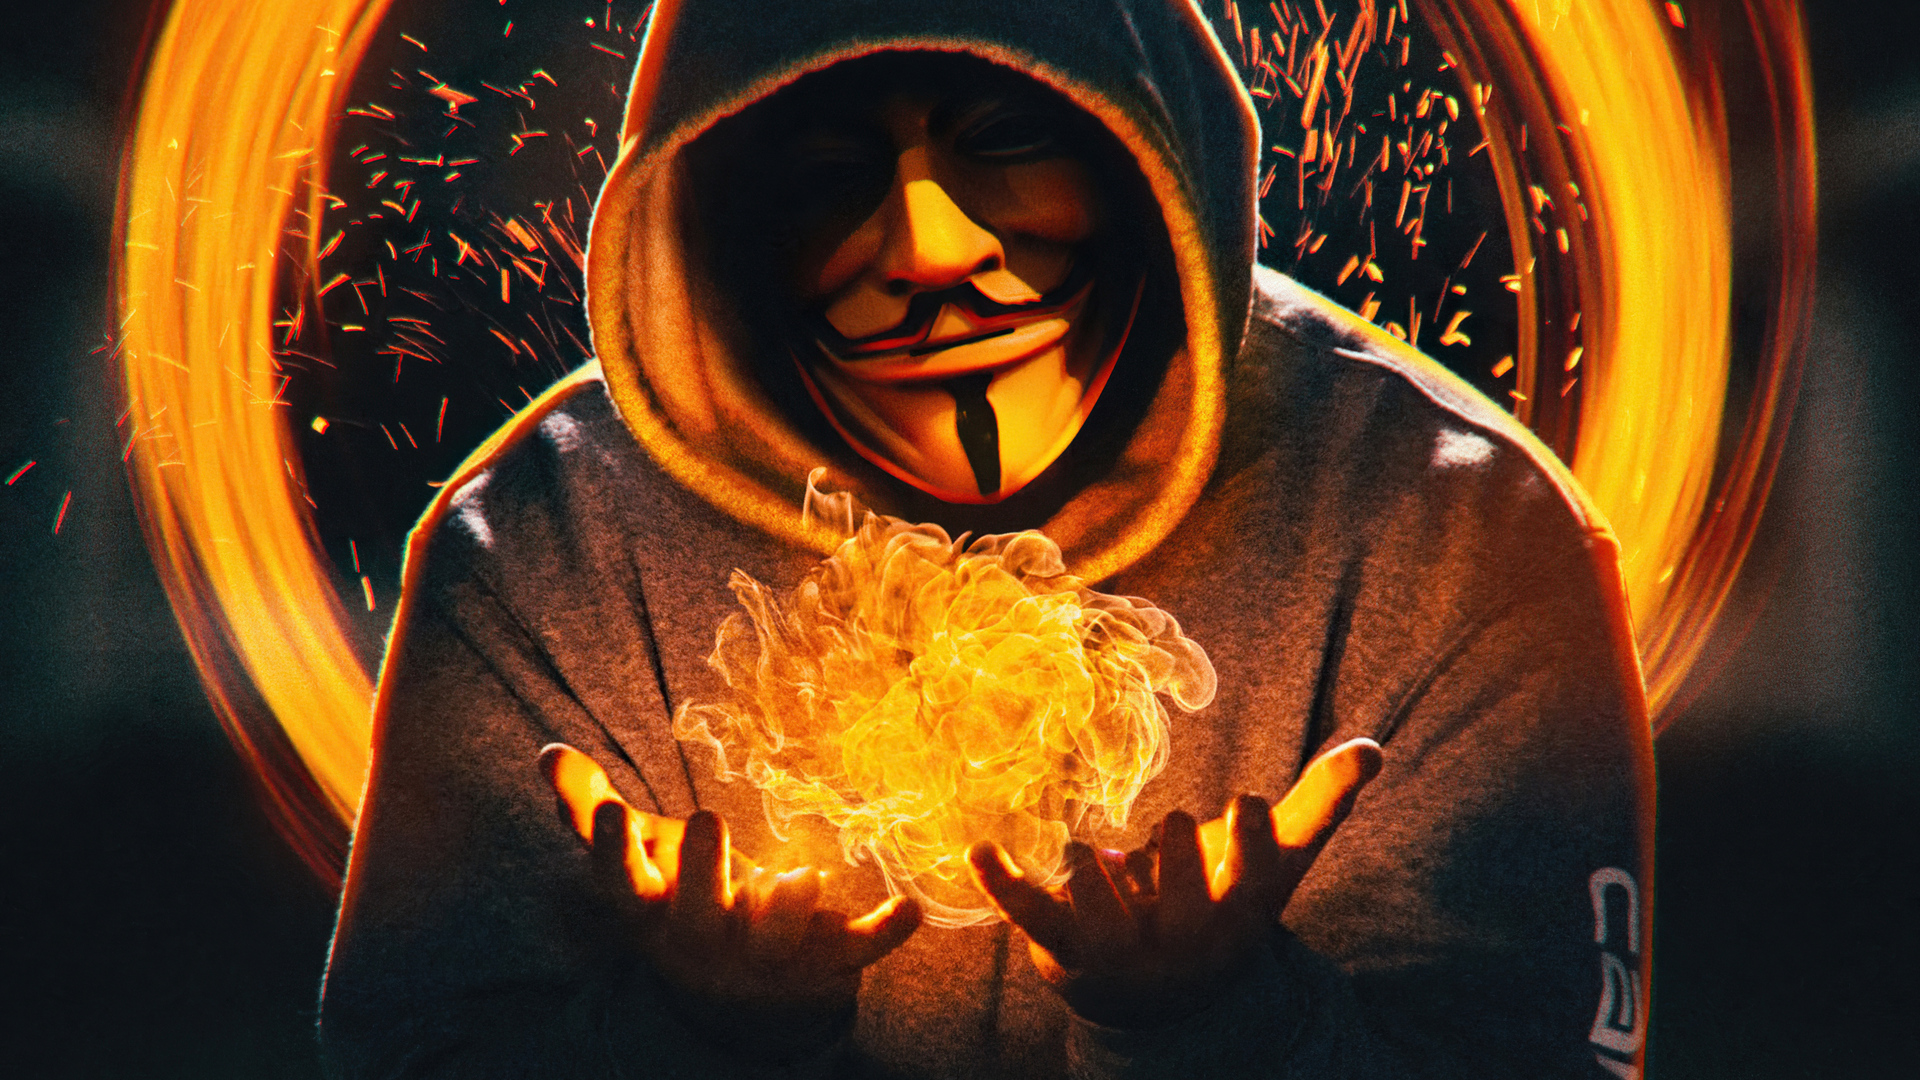 X flame in hand trick anonymous laptop full hd p hd k wallpapers images backgrounds photos and pictures